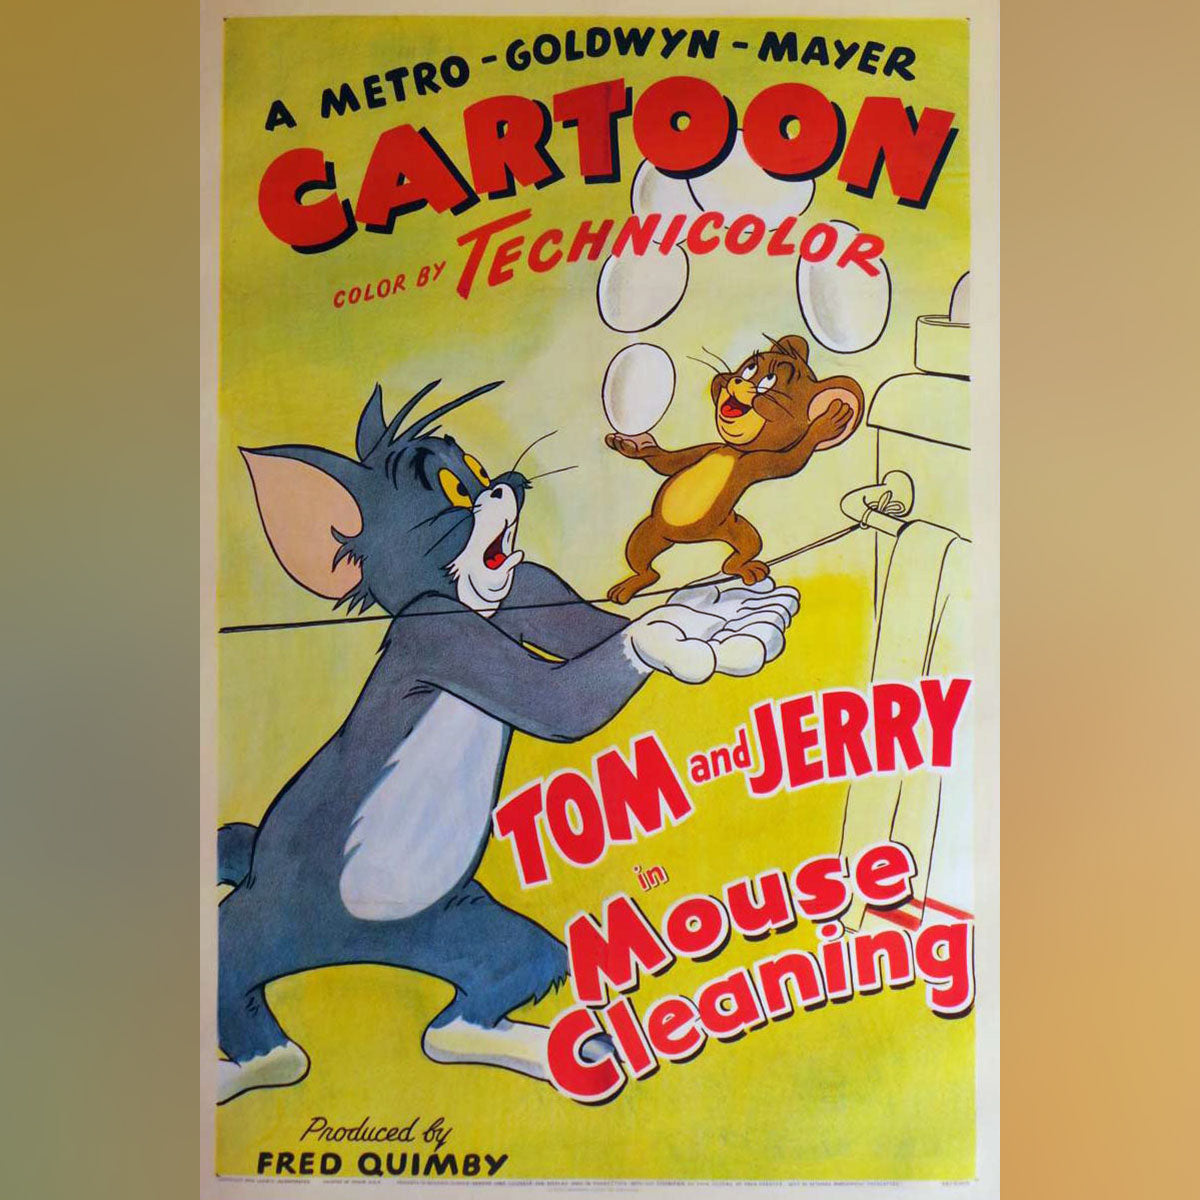 Original Movie Poster of Tom And Jerry In Mouse Cleaning (1948)